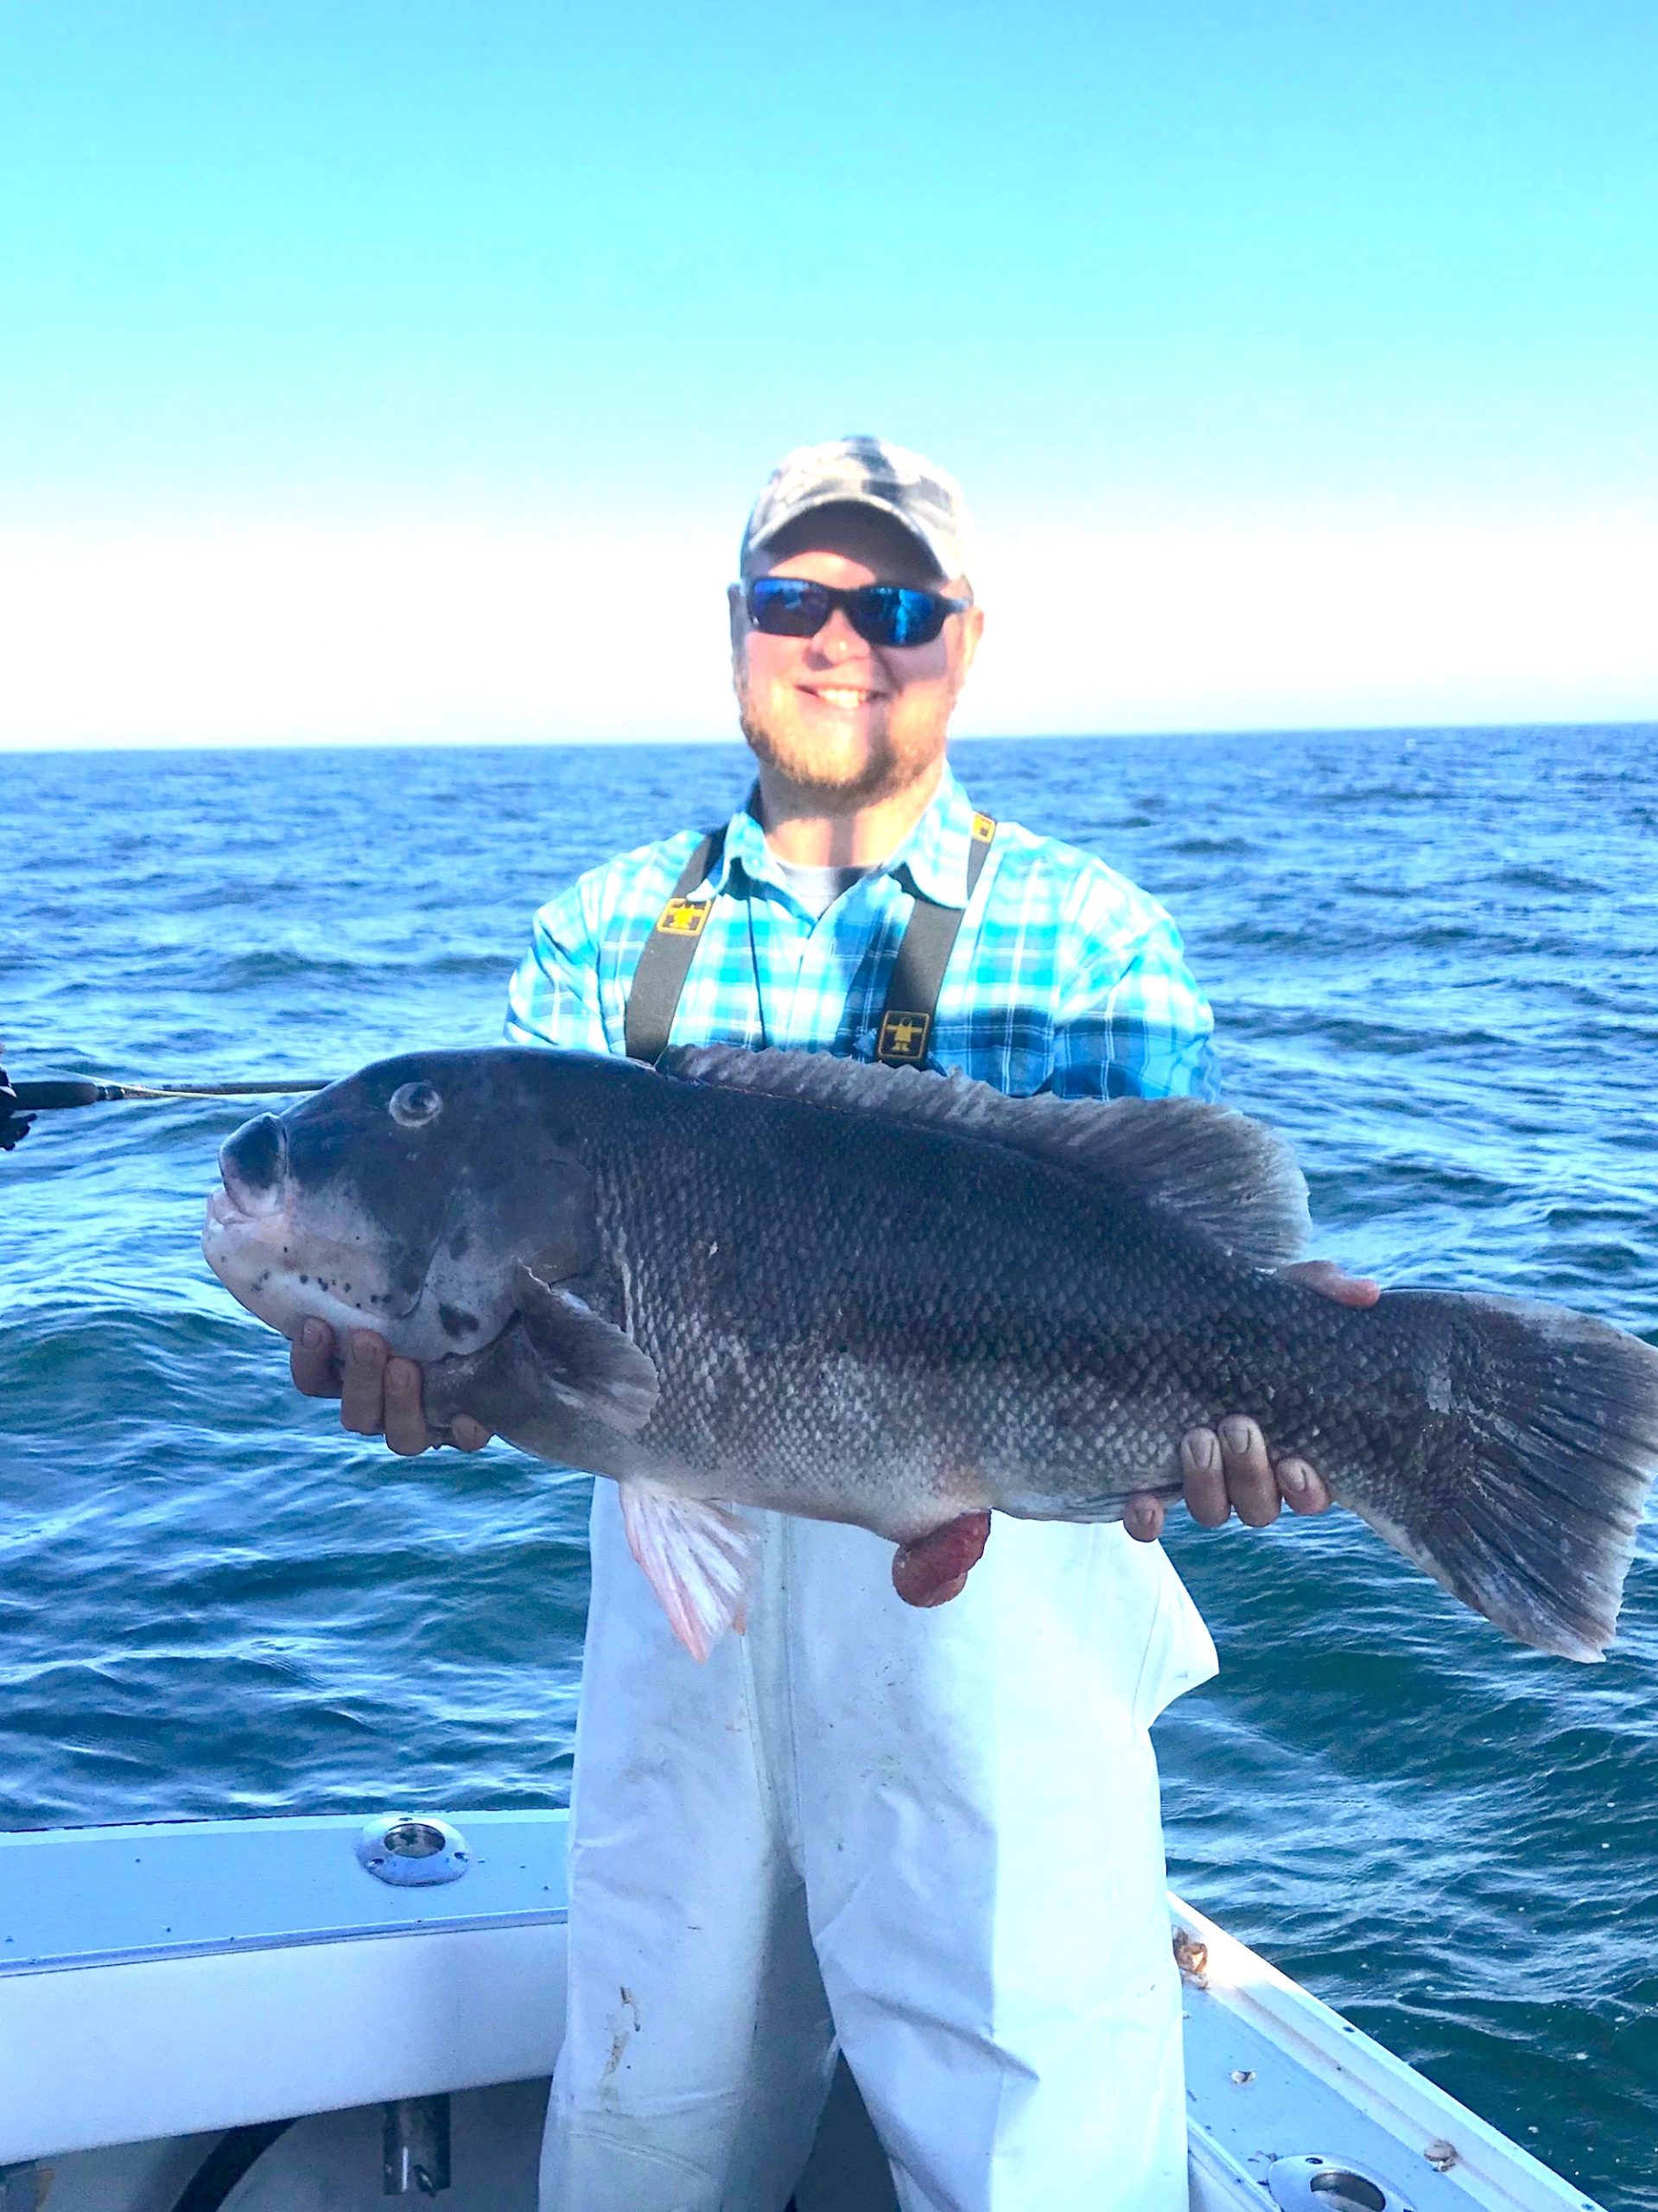 Another 20 Pound Tautog